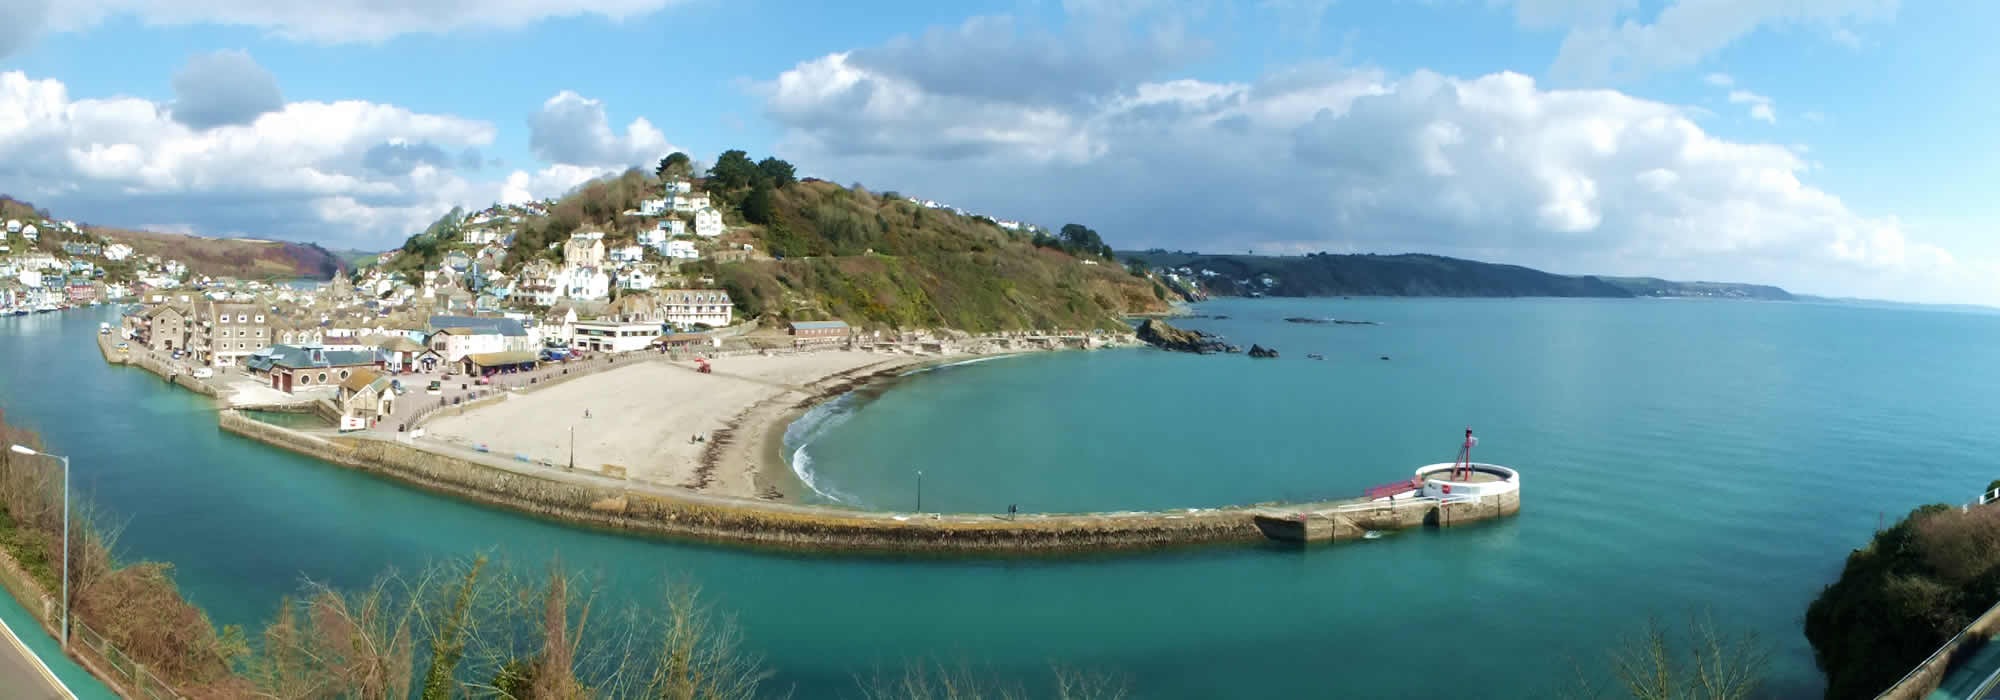 Views over Looe beach and the Banjo pier from The Watermark